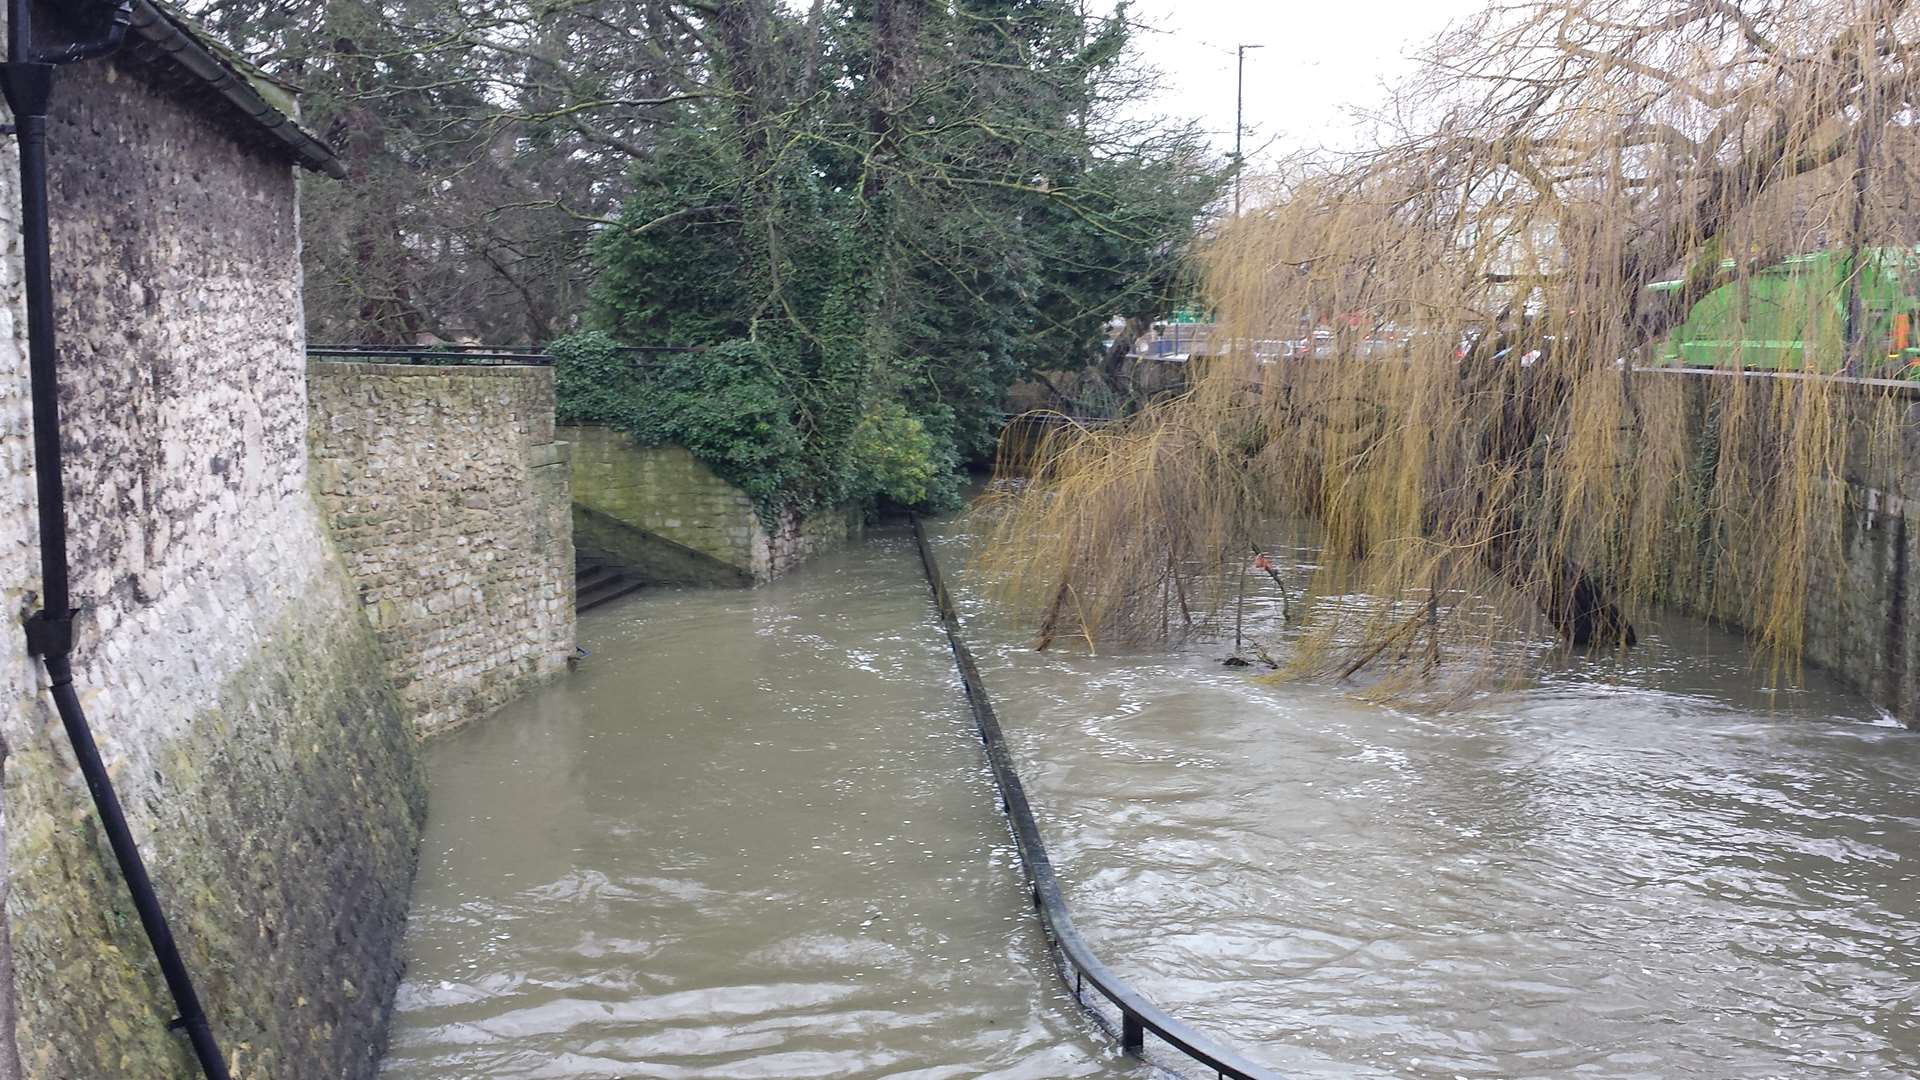 High river levels in Maidstone town centre